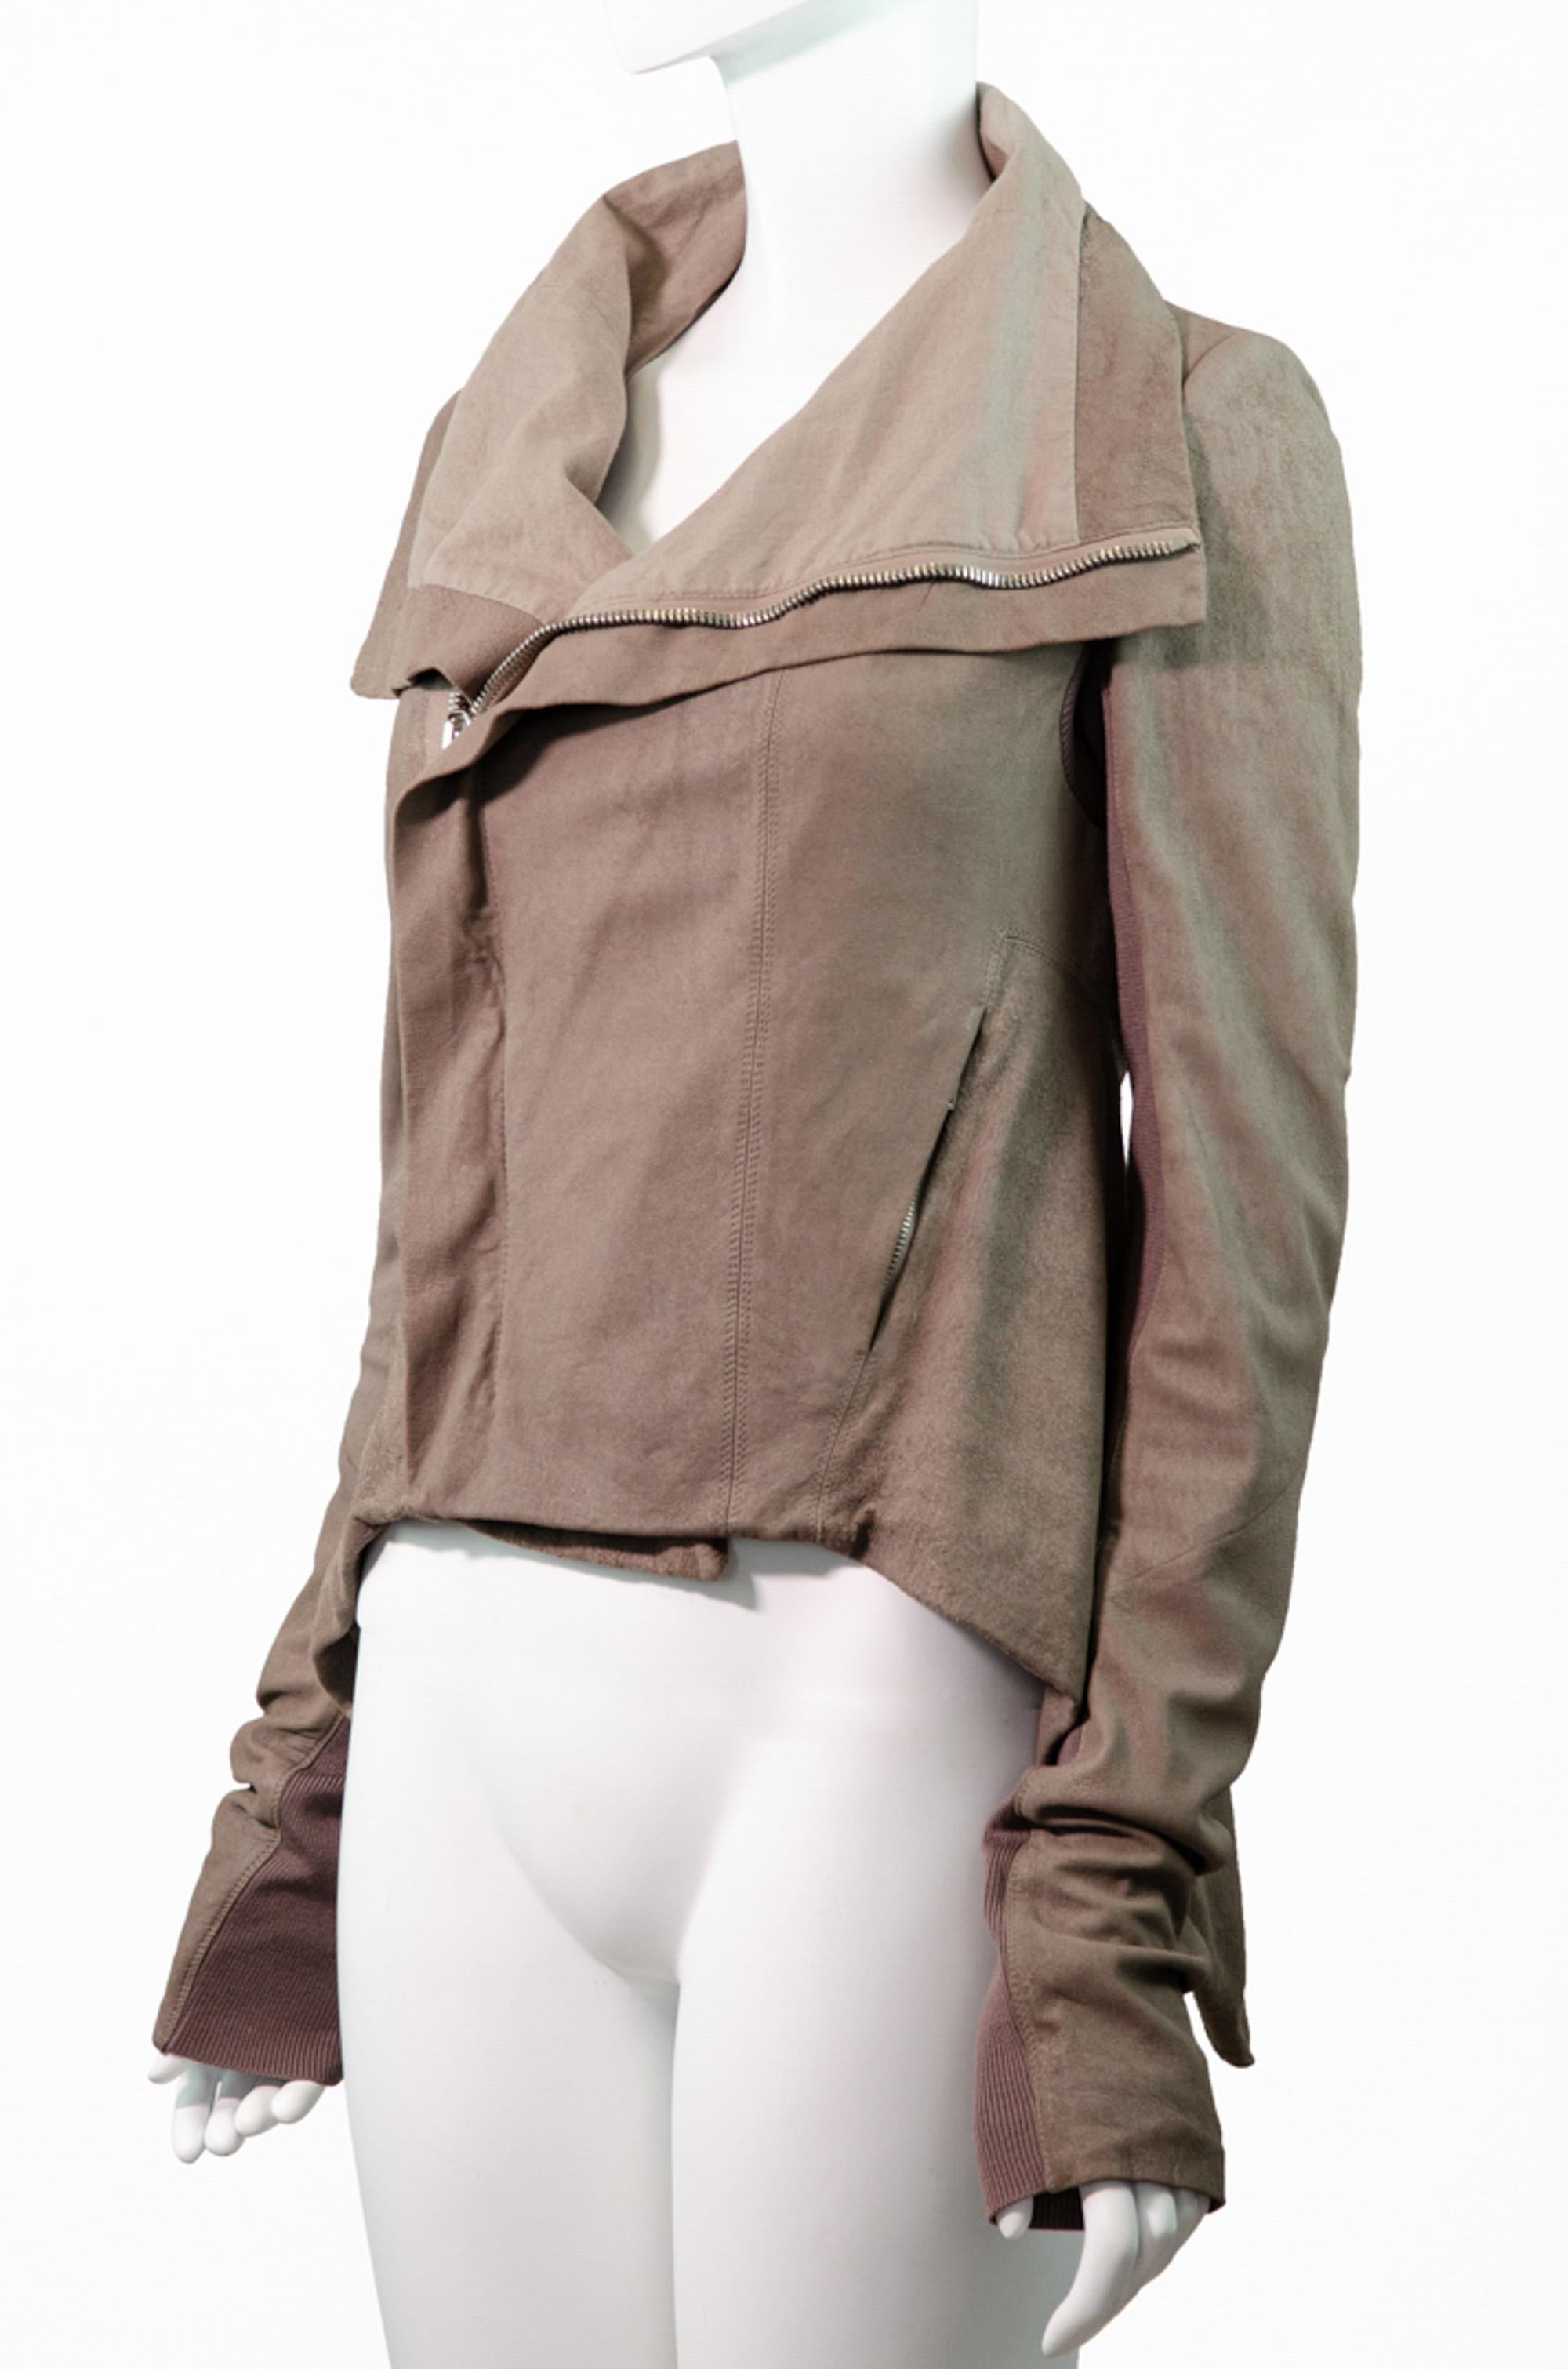 Classic avant-garde biker jacket from Rick Owens.

A true Rick Owens staple. This avant-garde jacket is made from a soft distressed lamb leather and features a concealed front zip closure, classic Rick Owens long sleeves with a ribbed detail on the